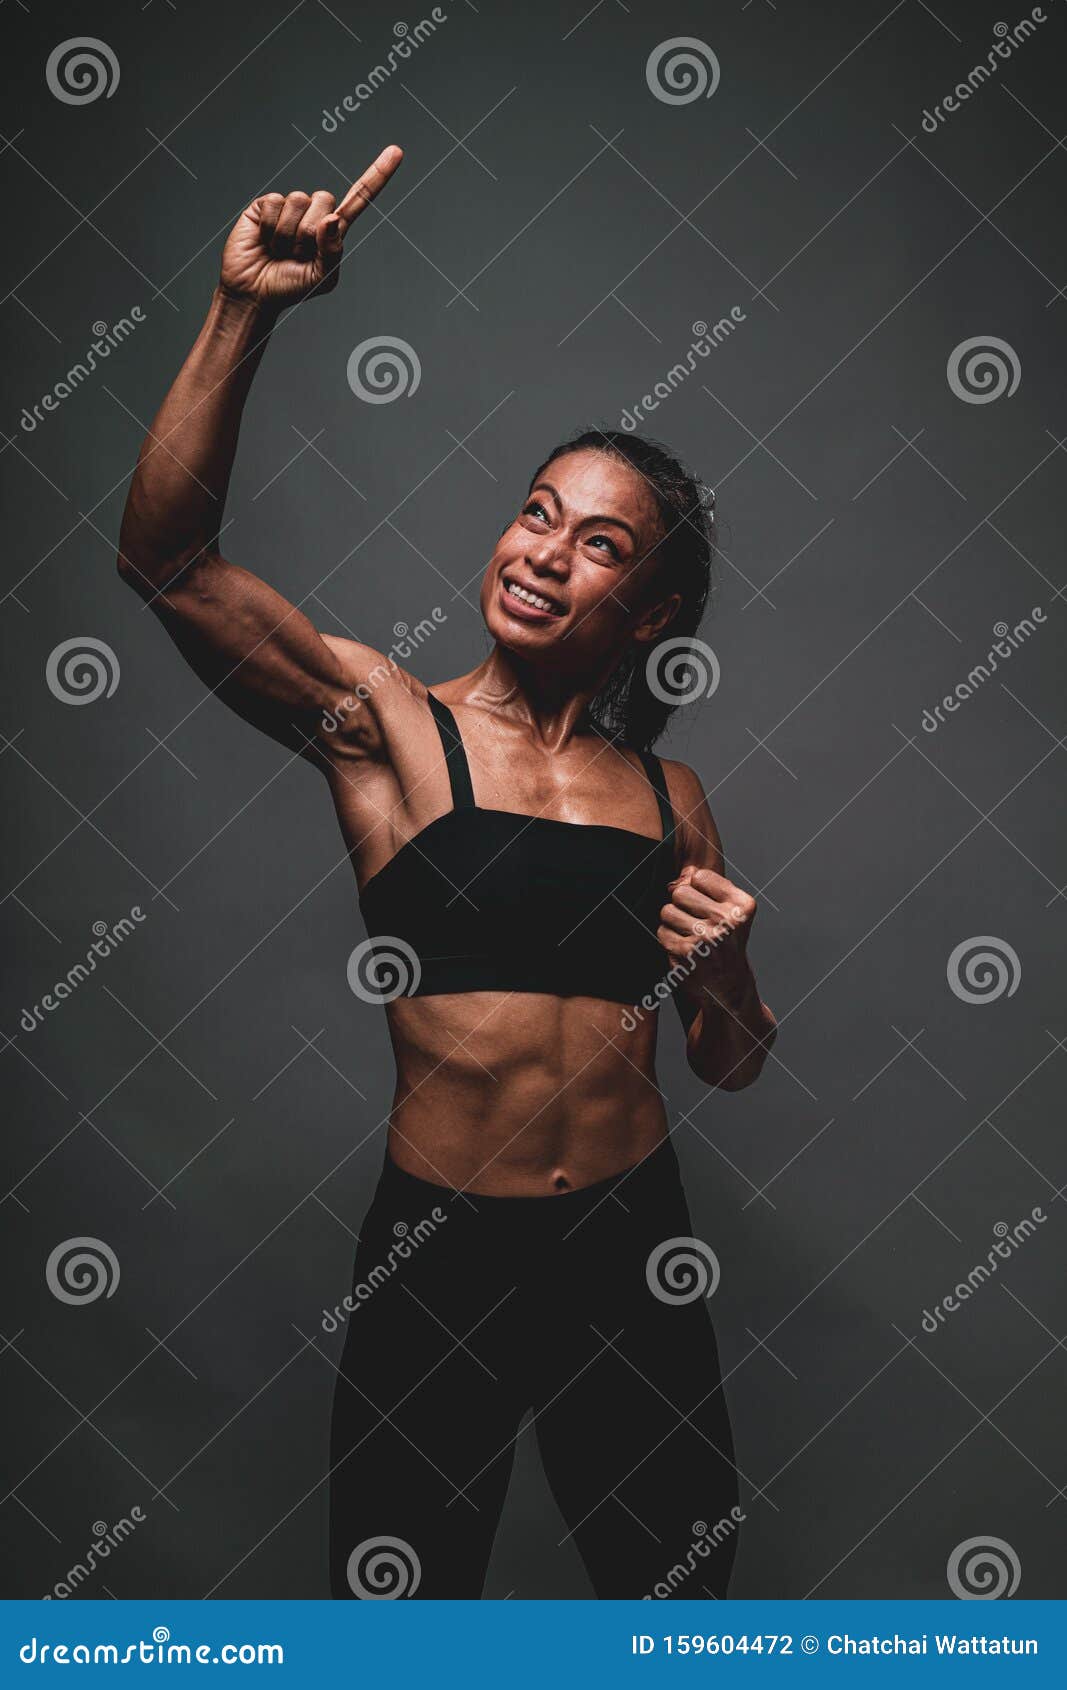 https://thumbs.dreamstime.com/z/portrait-healthy-athletic-year-old-asian-woman-lean-muscle-nice-core-body-lifting-her-right-arm-smiling-159604472.jpg